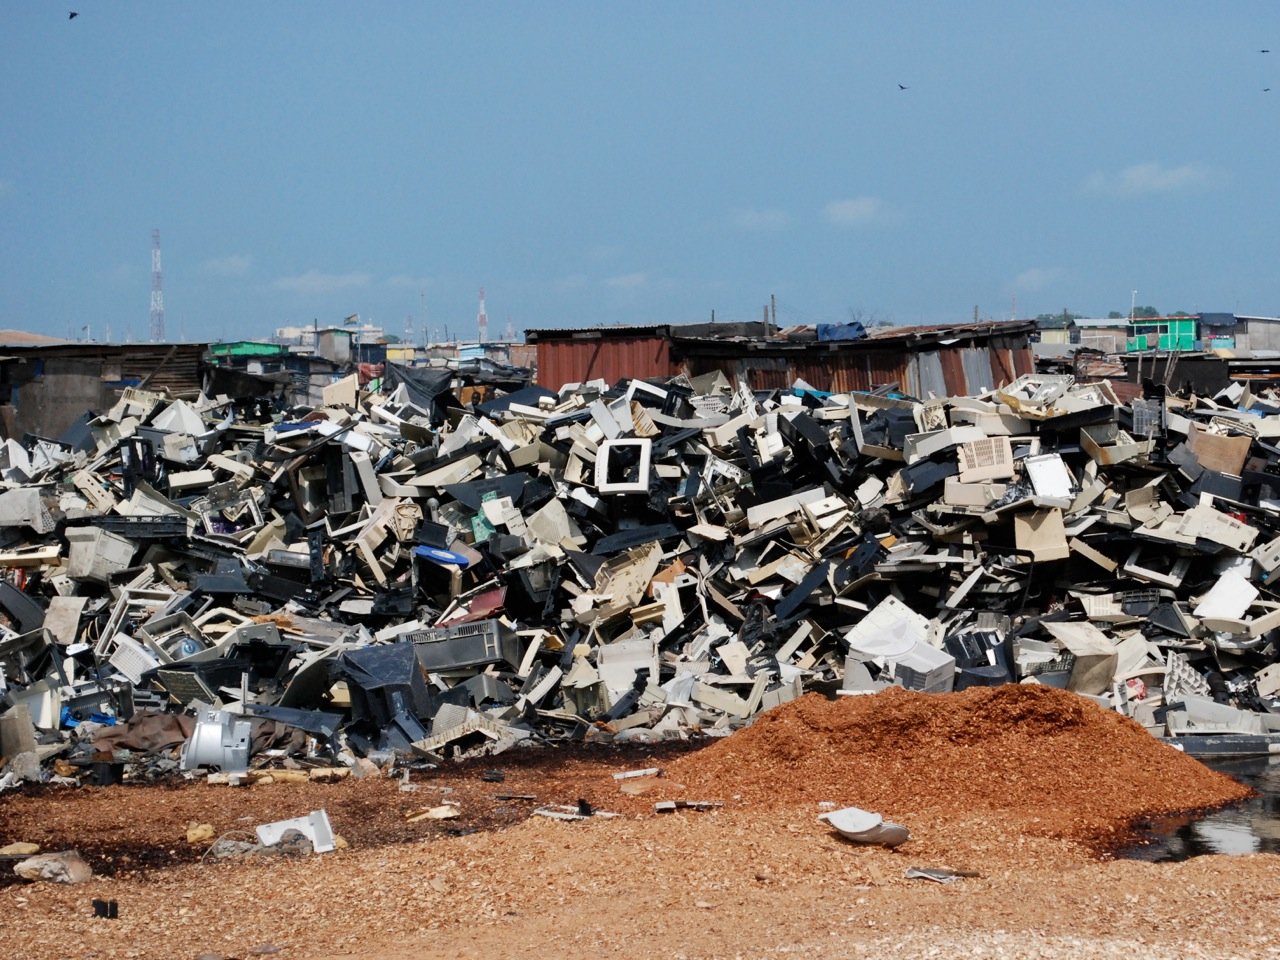 Electronic waste dumped in developing world